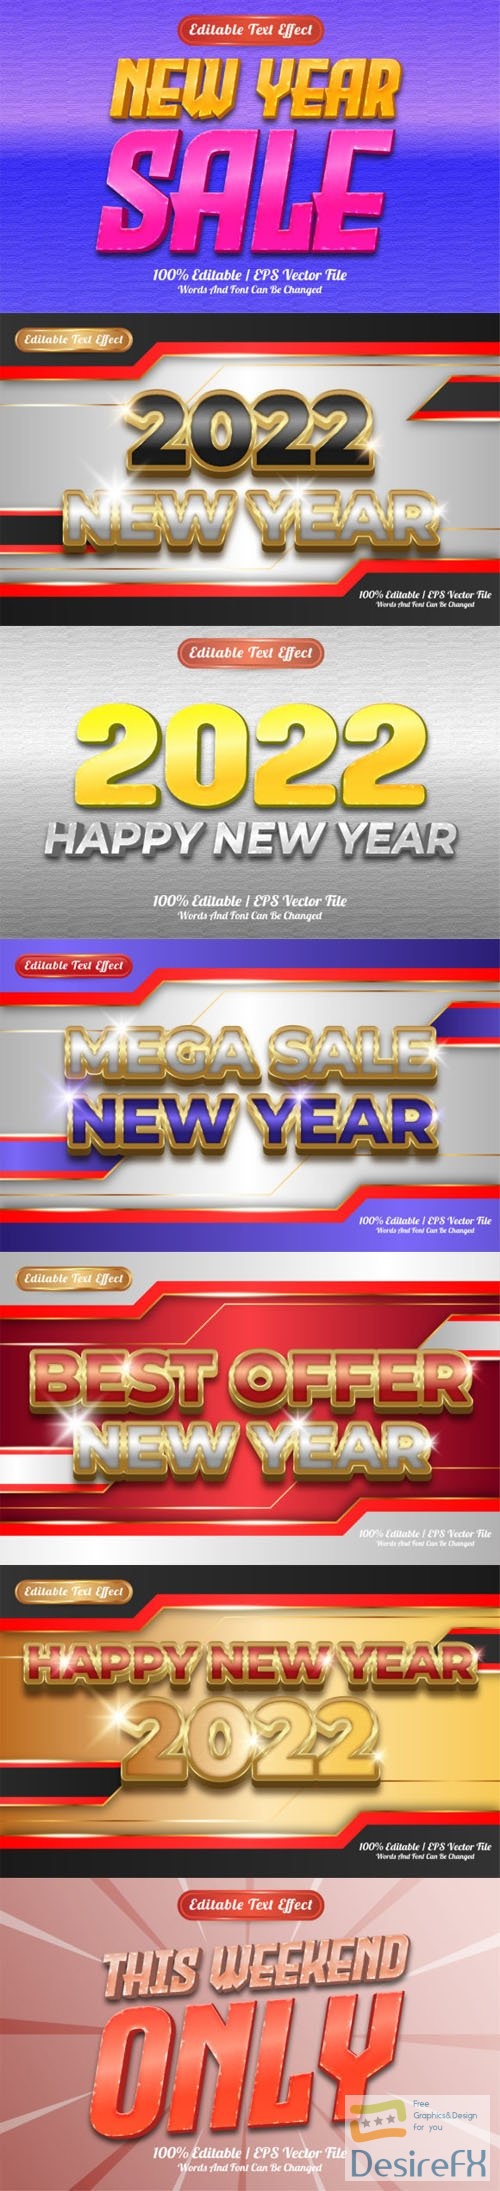 New Year 2022 Text Effects Collection - 10+ Vector Templates